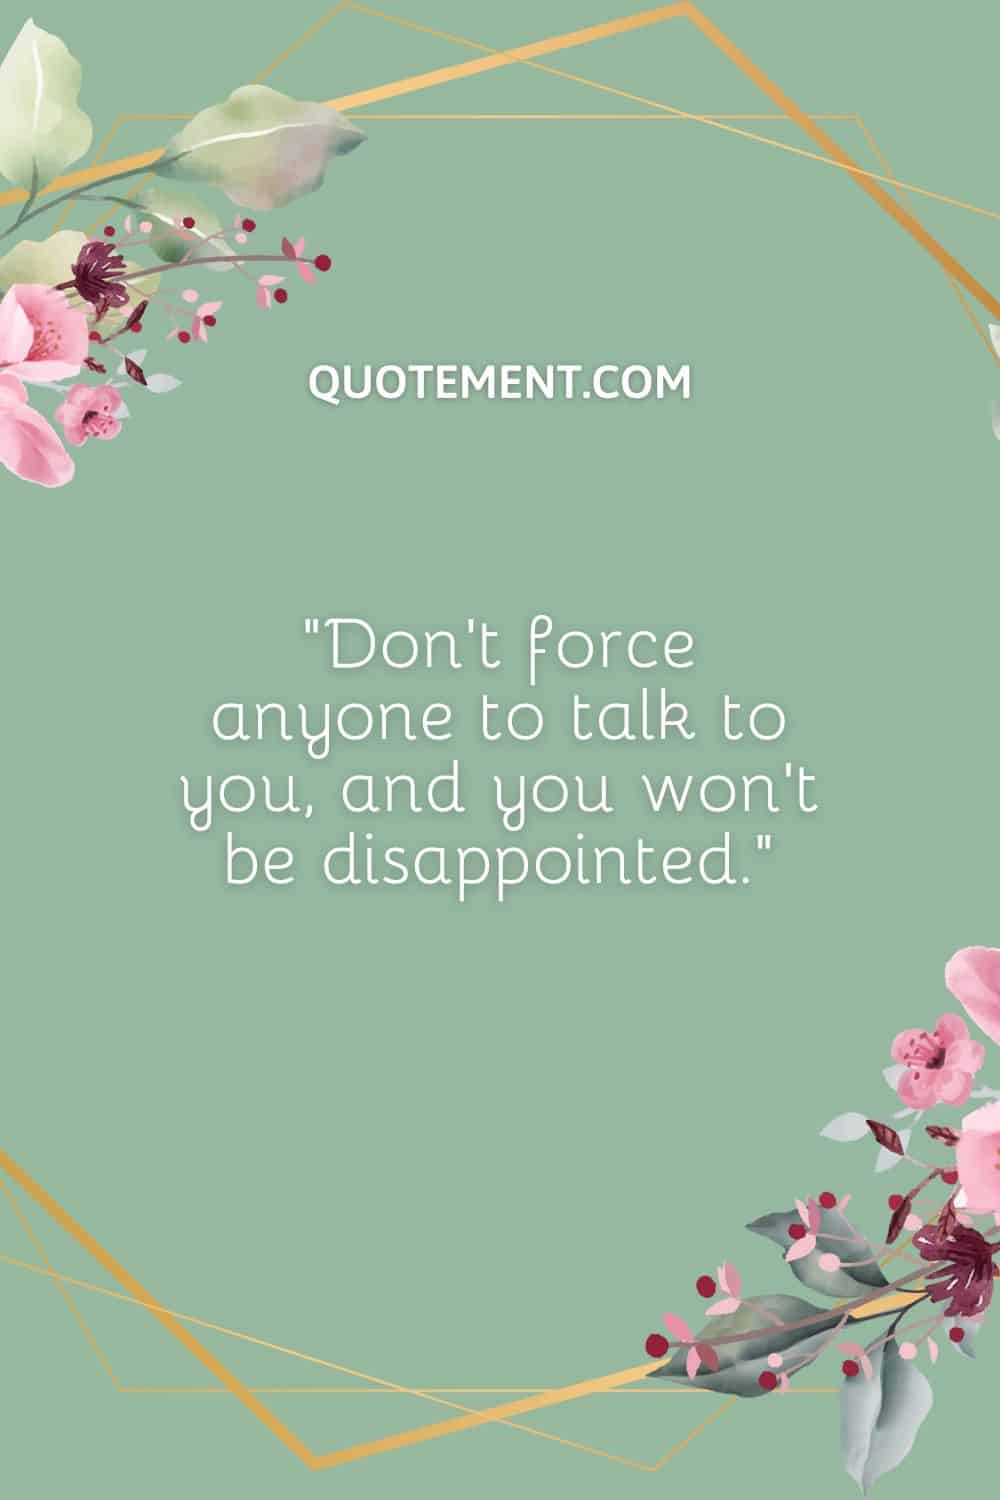 Don’t force anyone to talk to you, and you won’t be disappointed